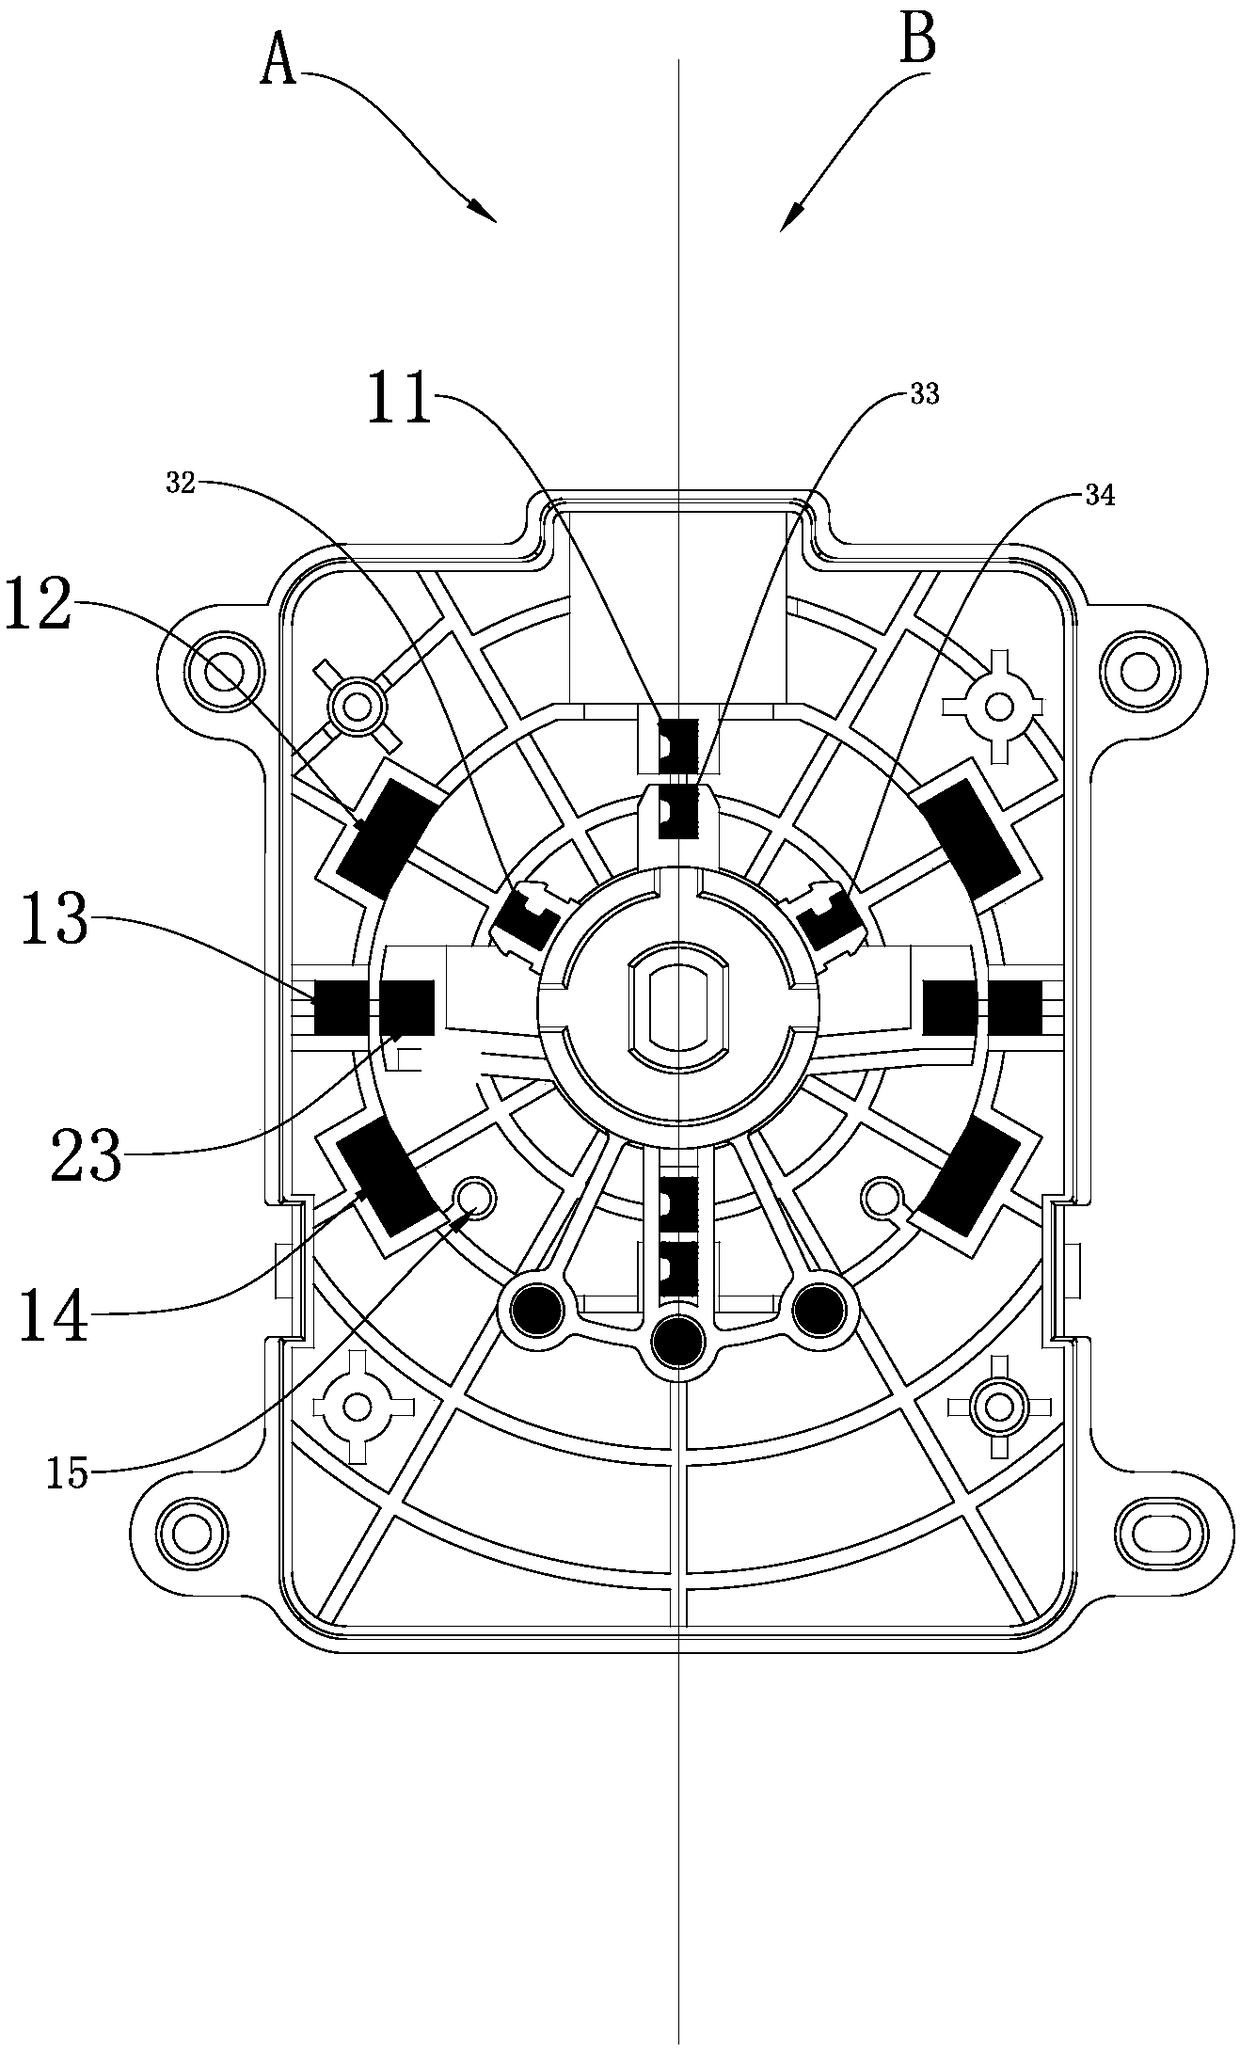 Rotary electronic gear shifting device